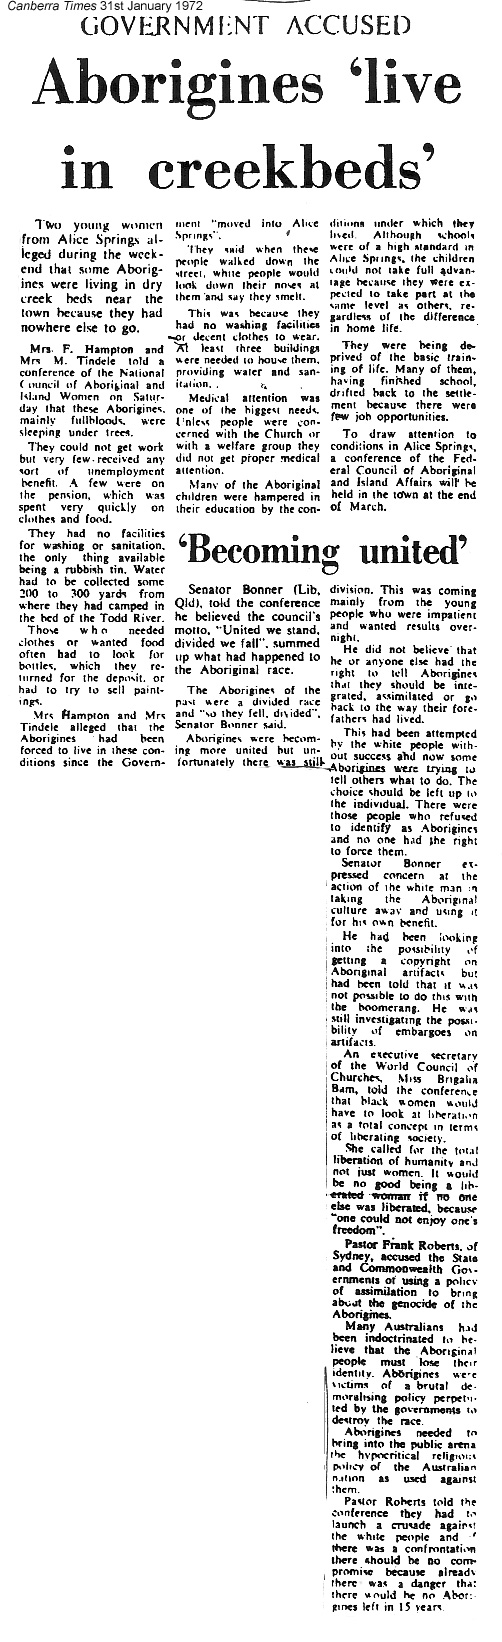 Canberra Times 31st January 1972